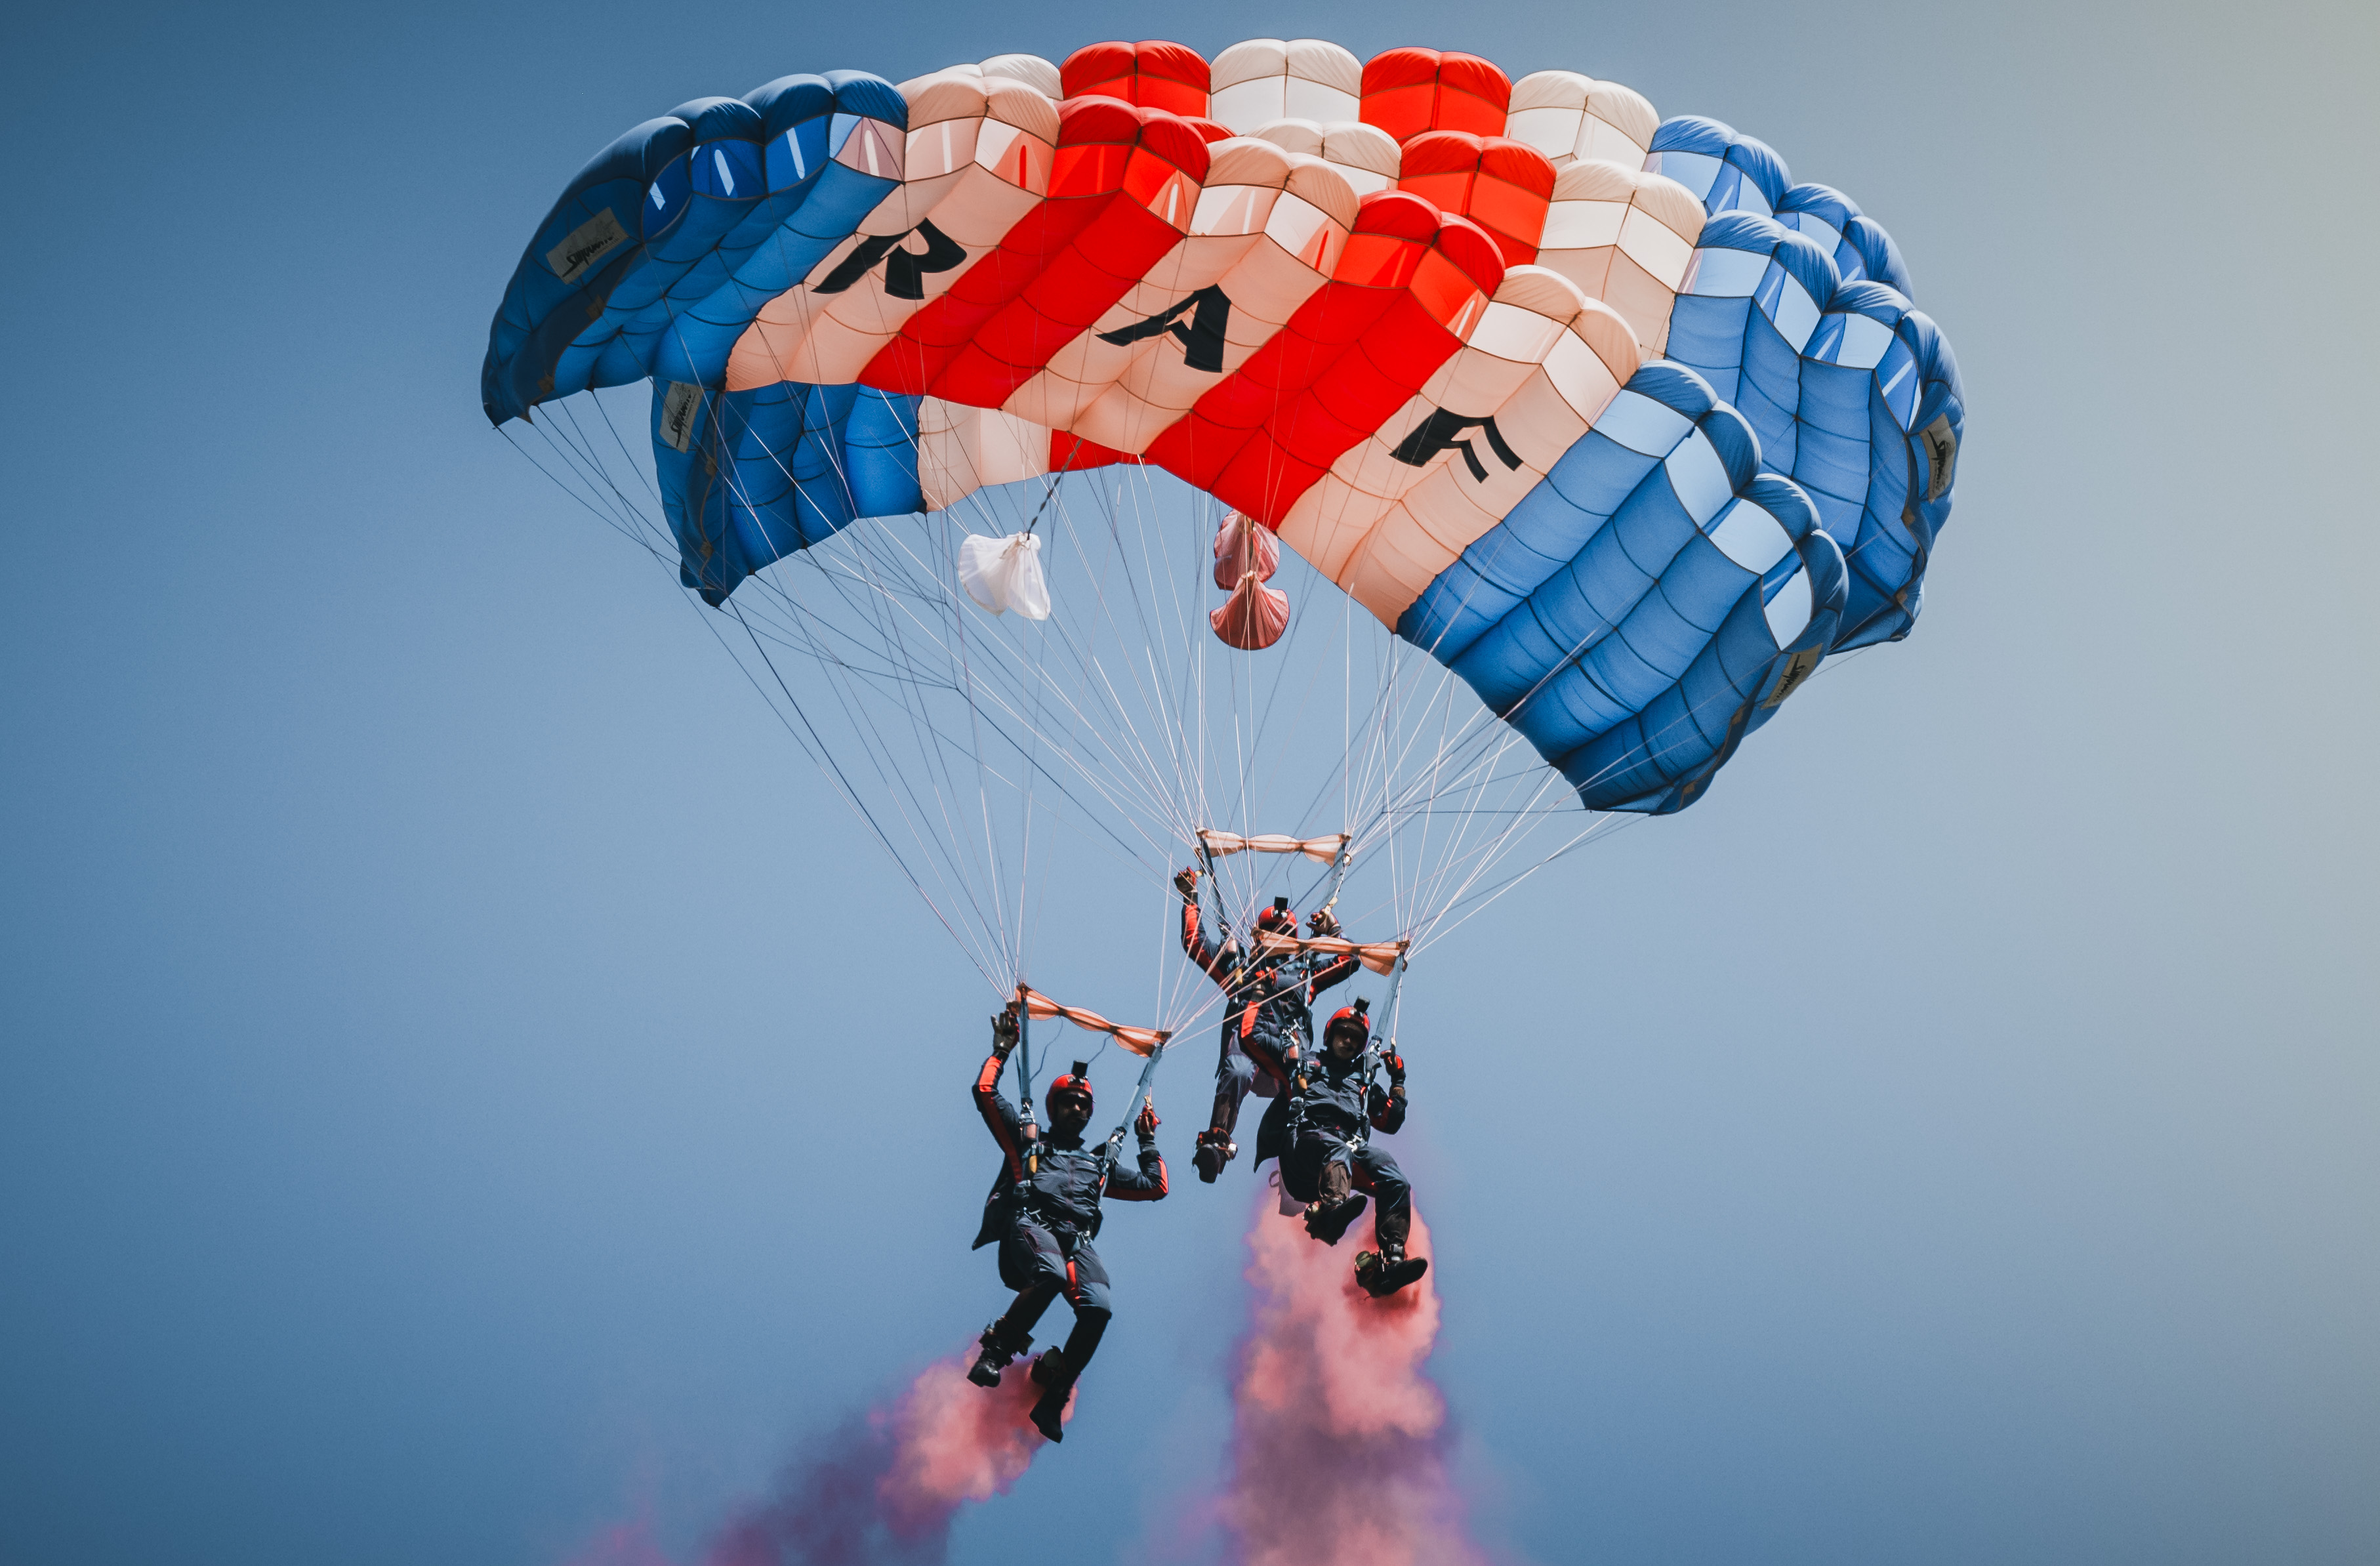 3 of the RAF parachutists performing the display